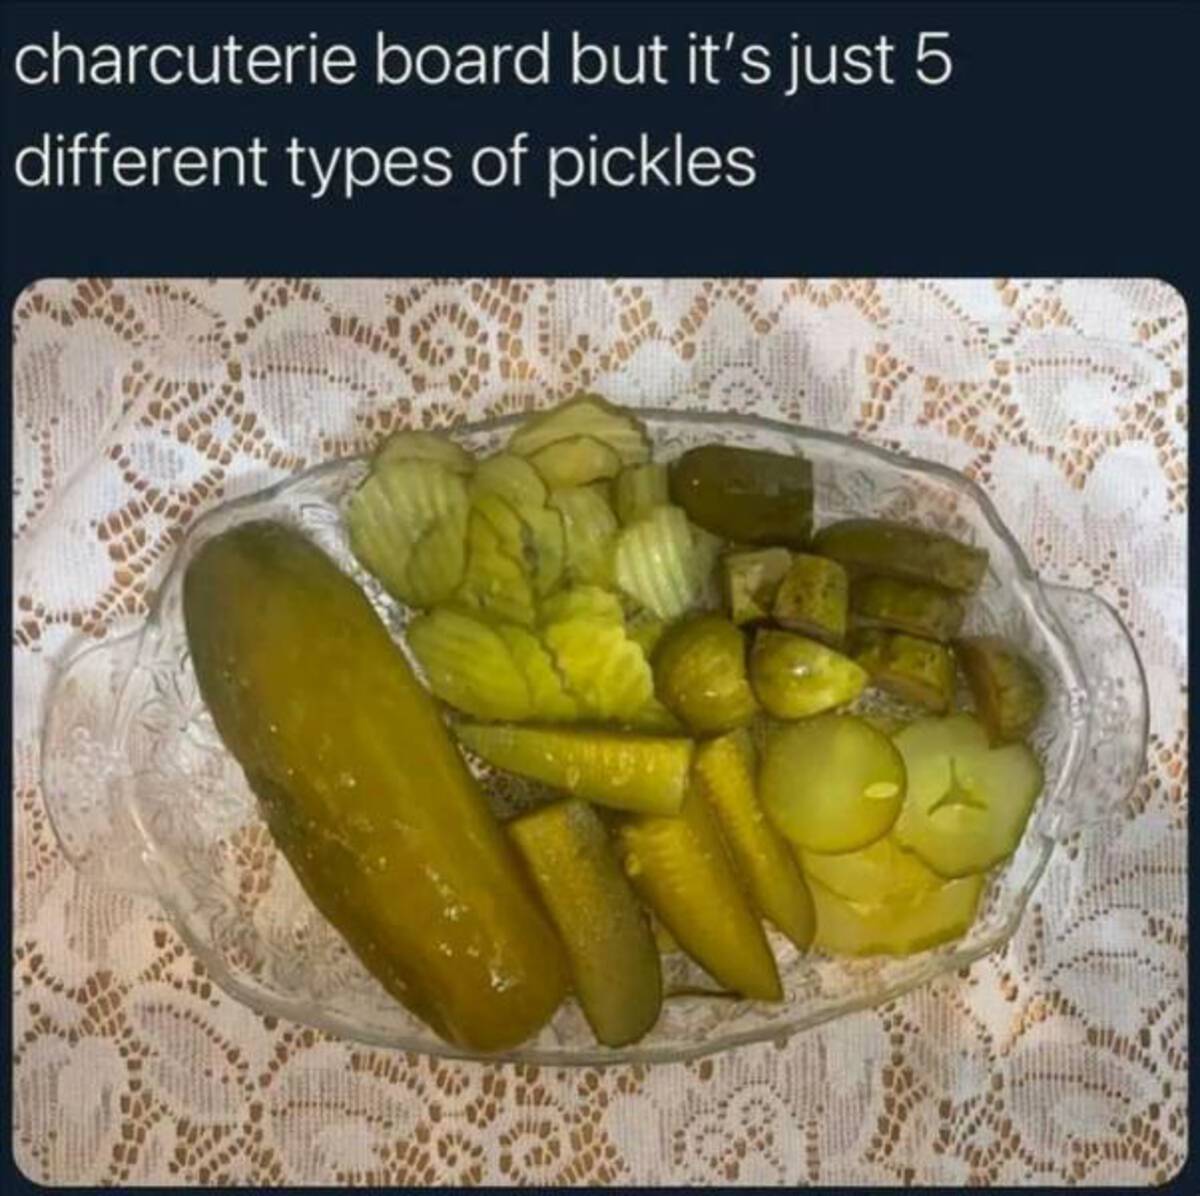 charcuterie board but it's just pickles - charcuterie board but it's just 5 different types of pickles